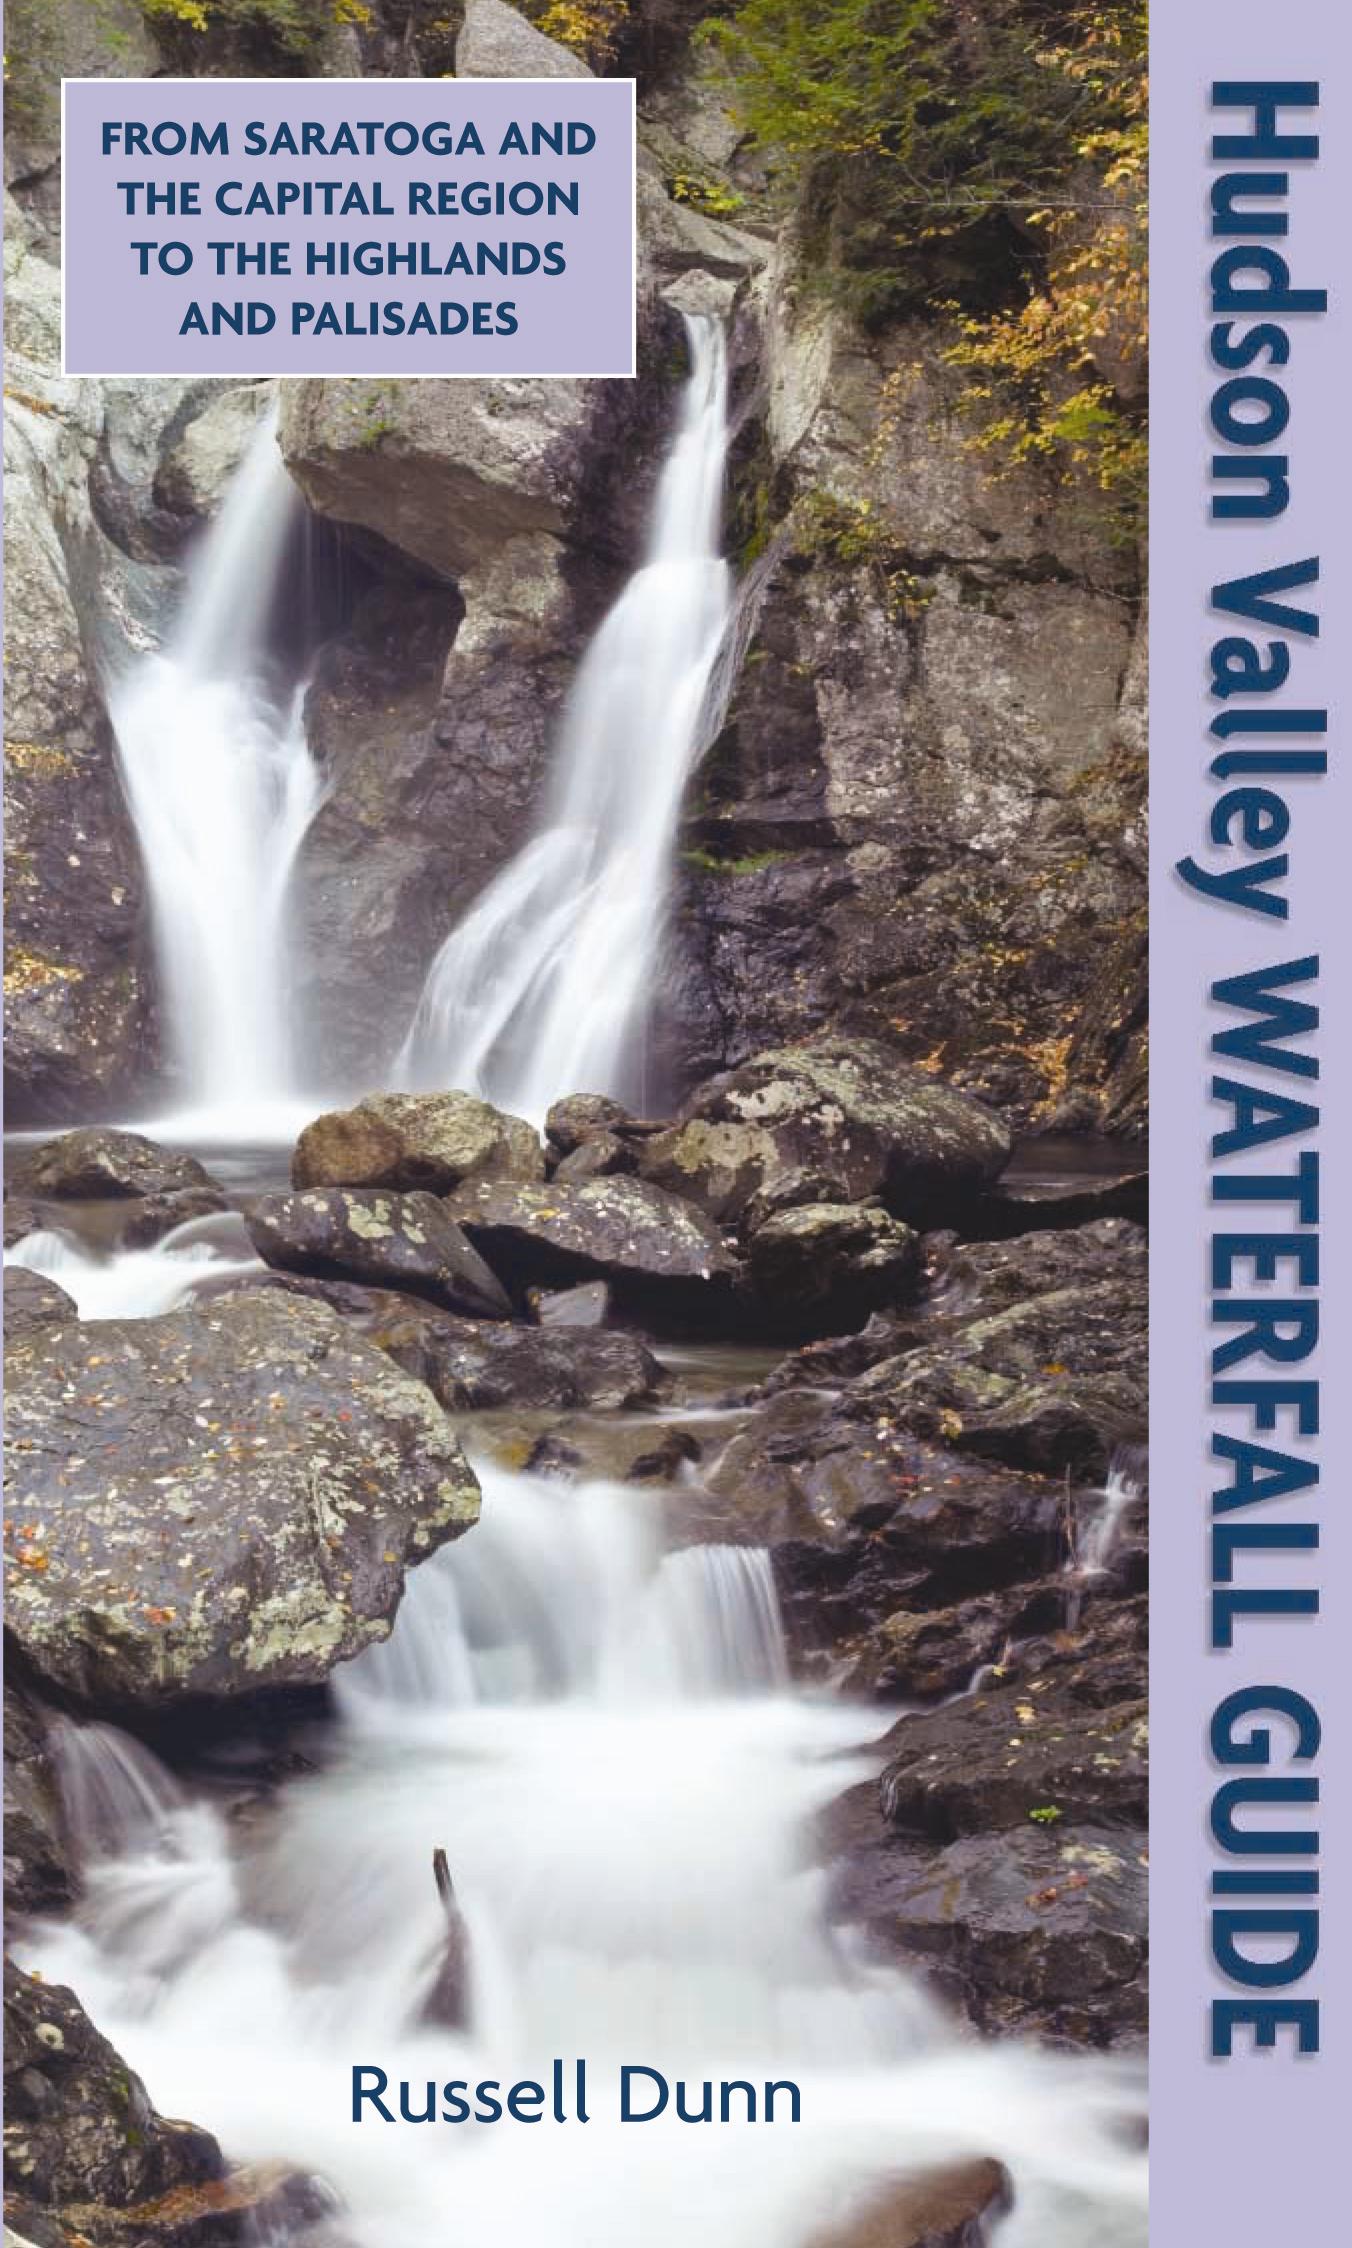 HUDSON VALLEY WATERFALL GUIDE